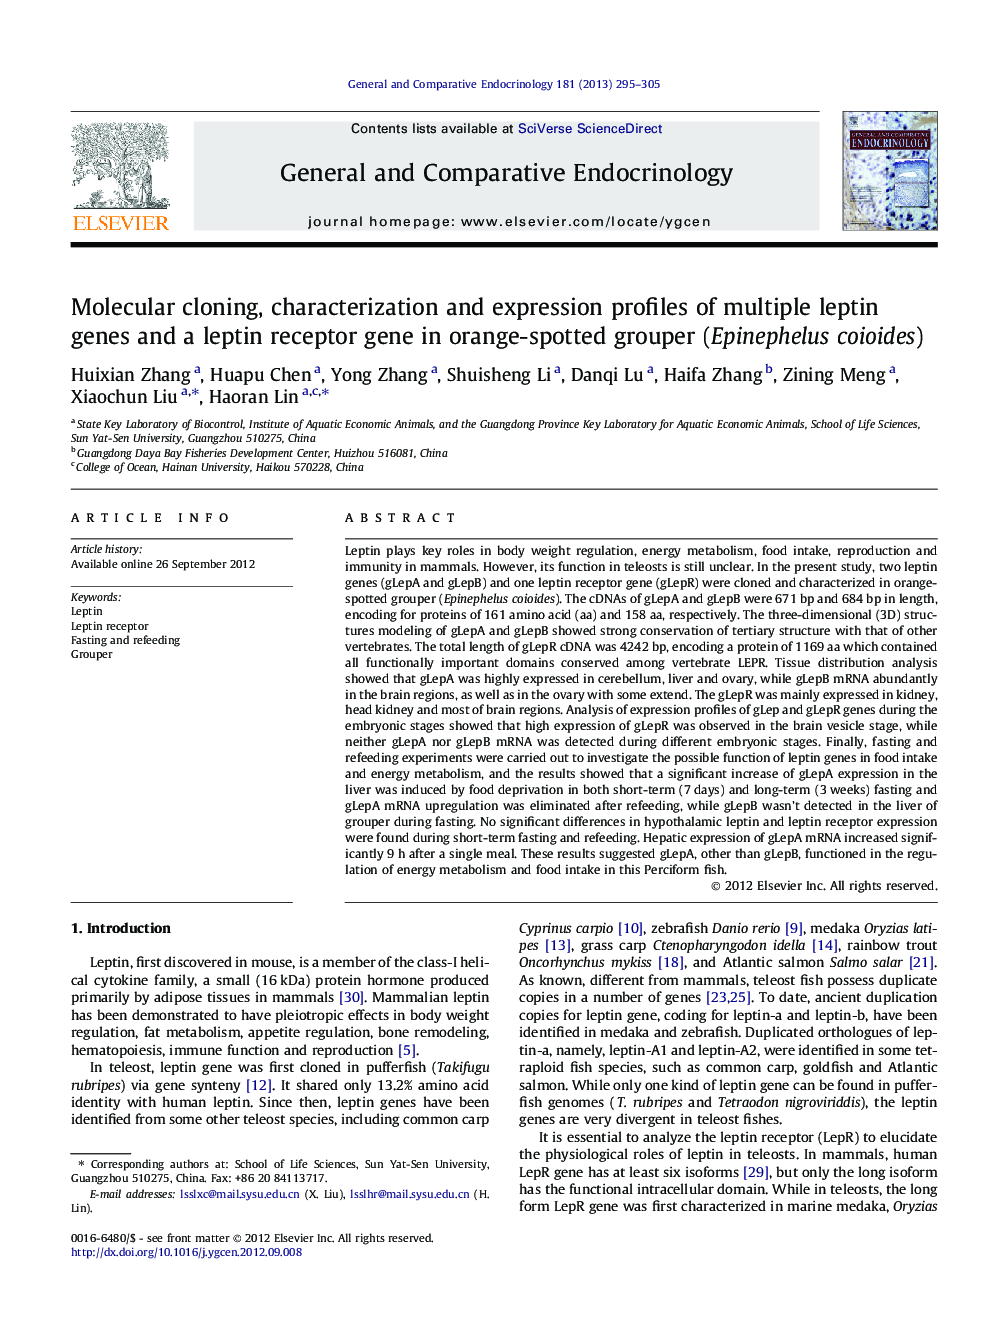 Molecular cloning, characterization and expression profiles of multiple leptin genes and a leptin receptor gene in orange-spotted grouper (Epinephelus coioides)